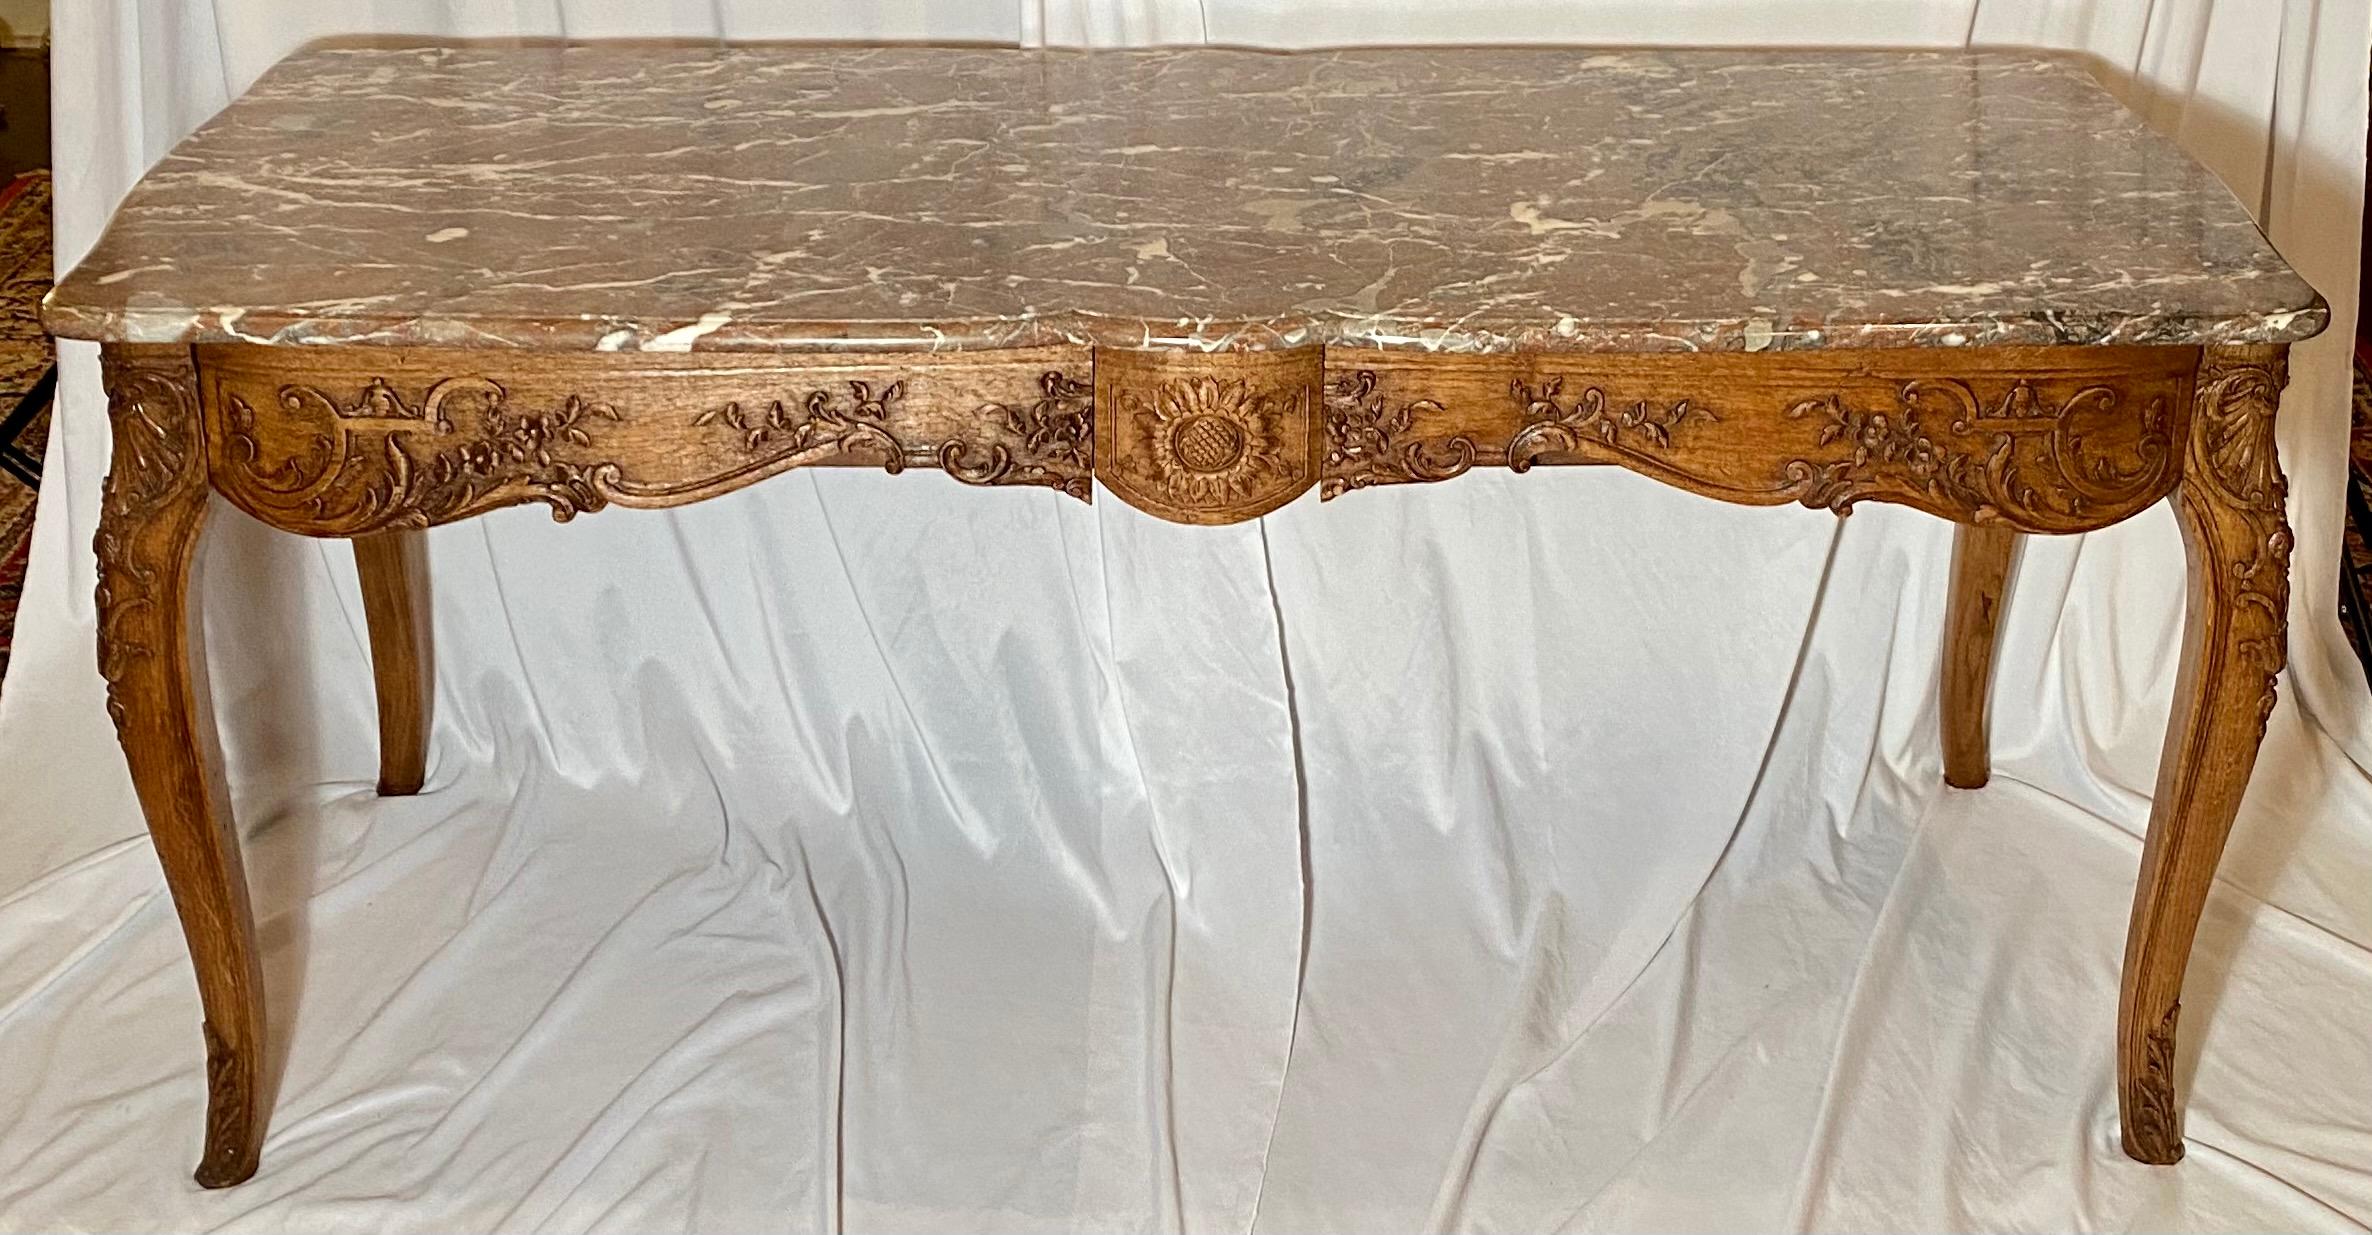 Antique French marble-top carved Regency center table, circa 1890. Wonderful carving and a fine example of craftsmanship.

 